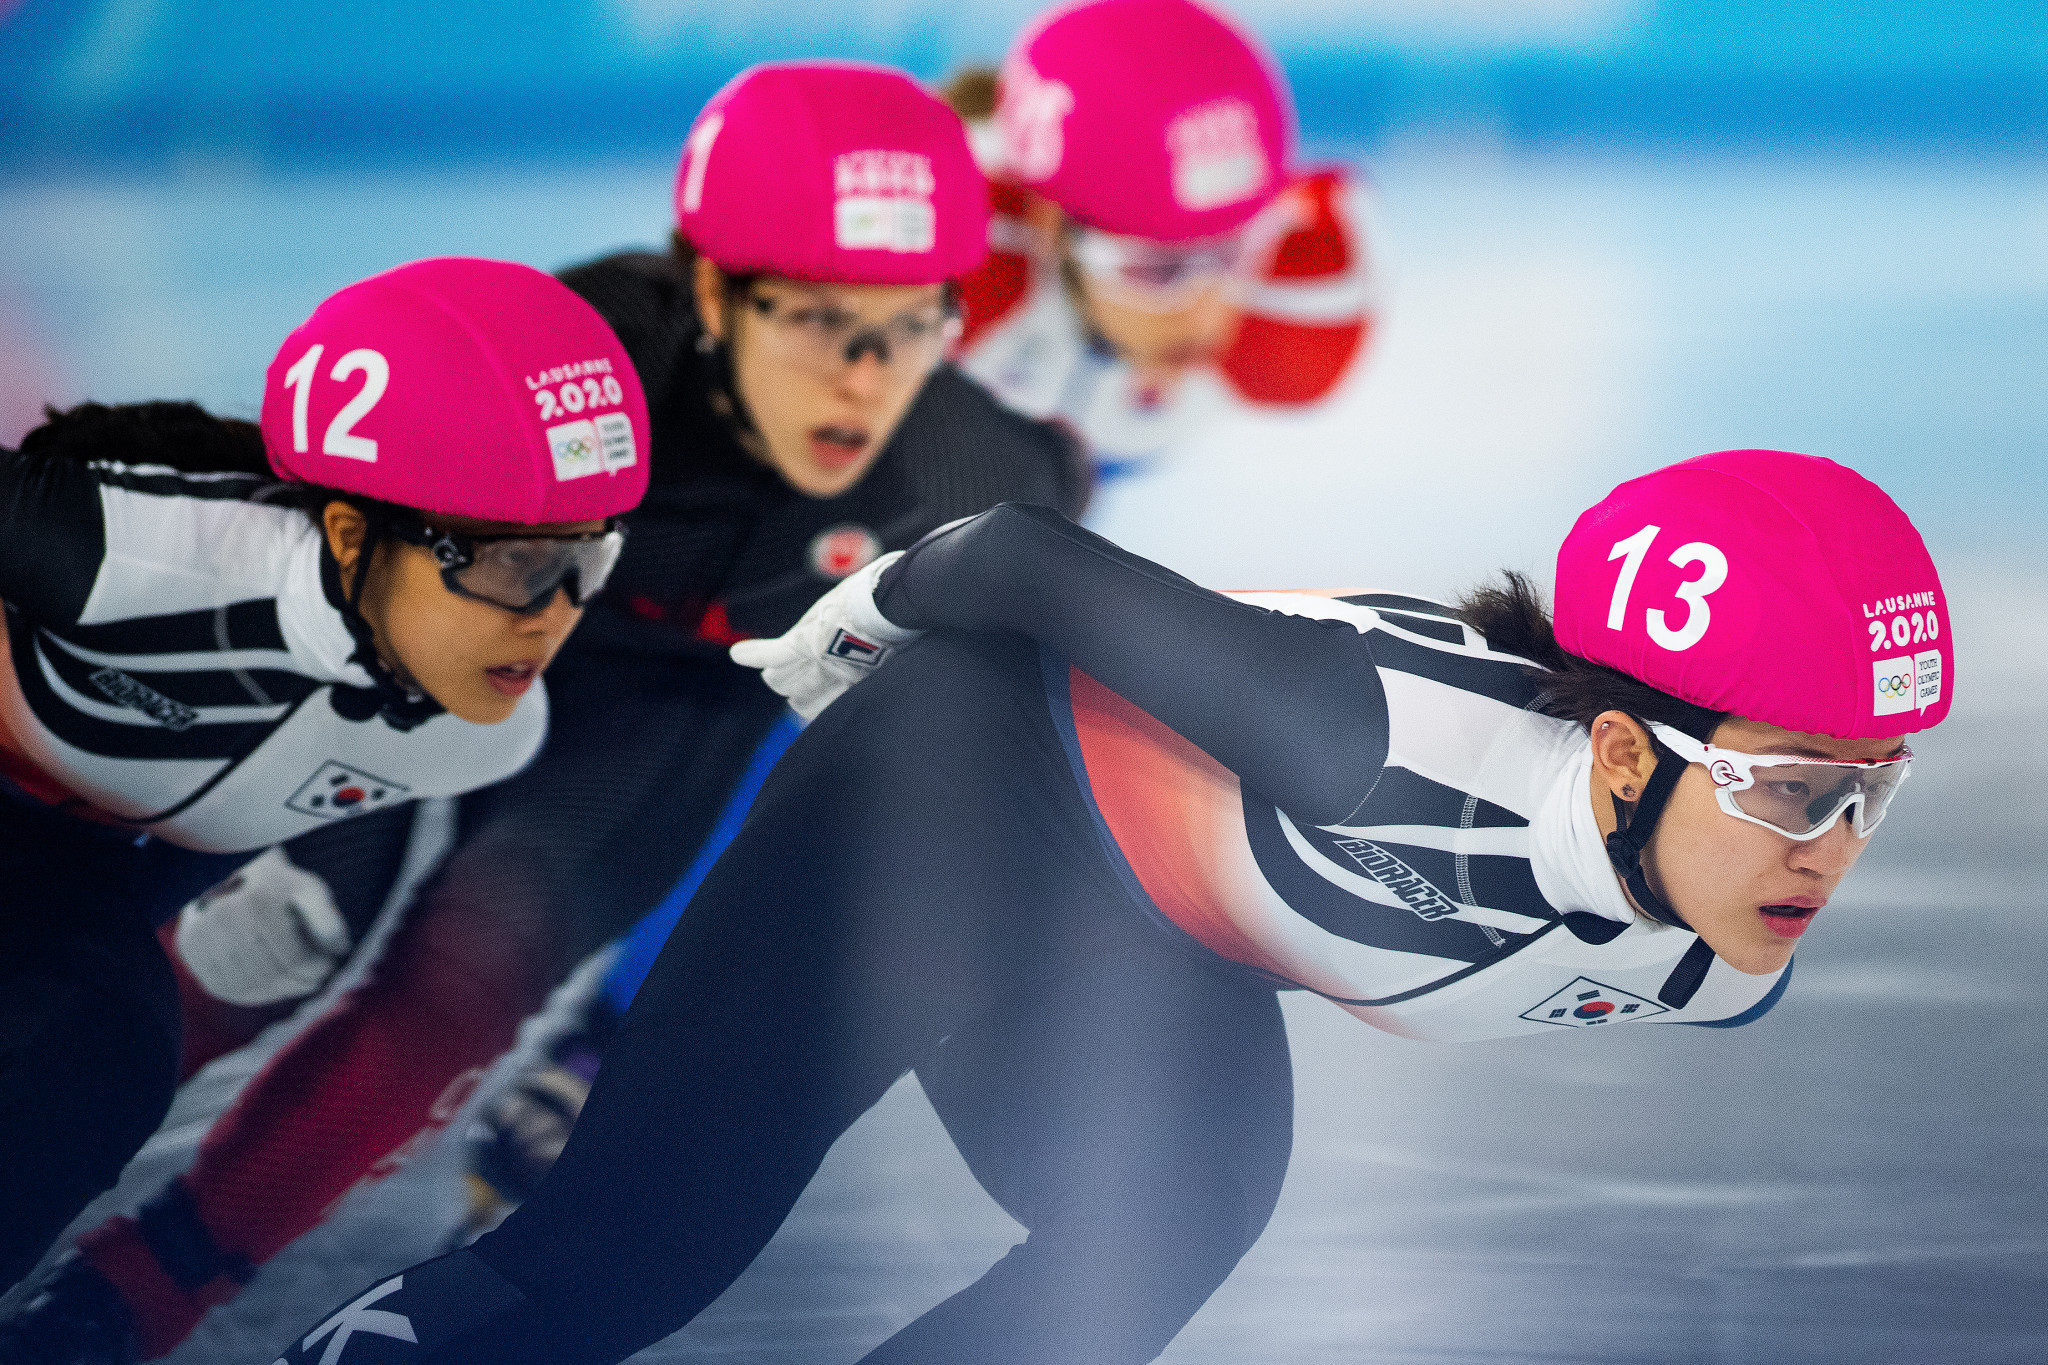 South Korea dominate short track speed skating at Lausanne 2020